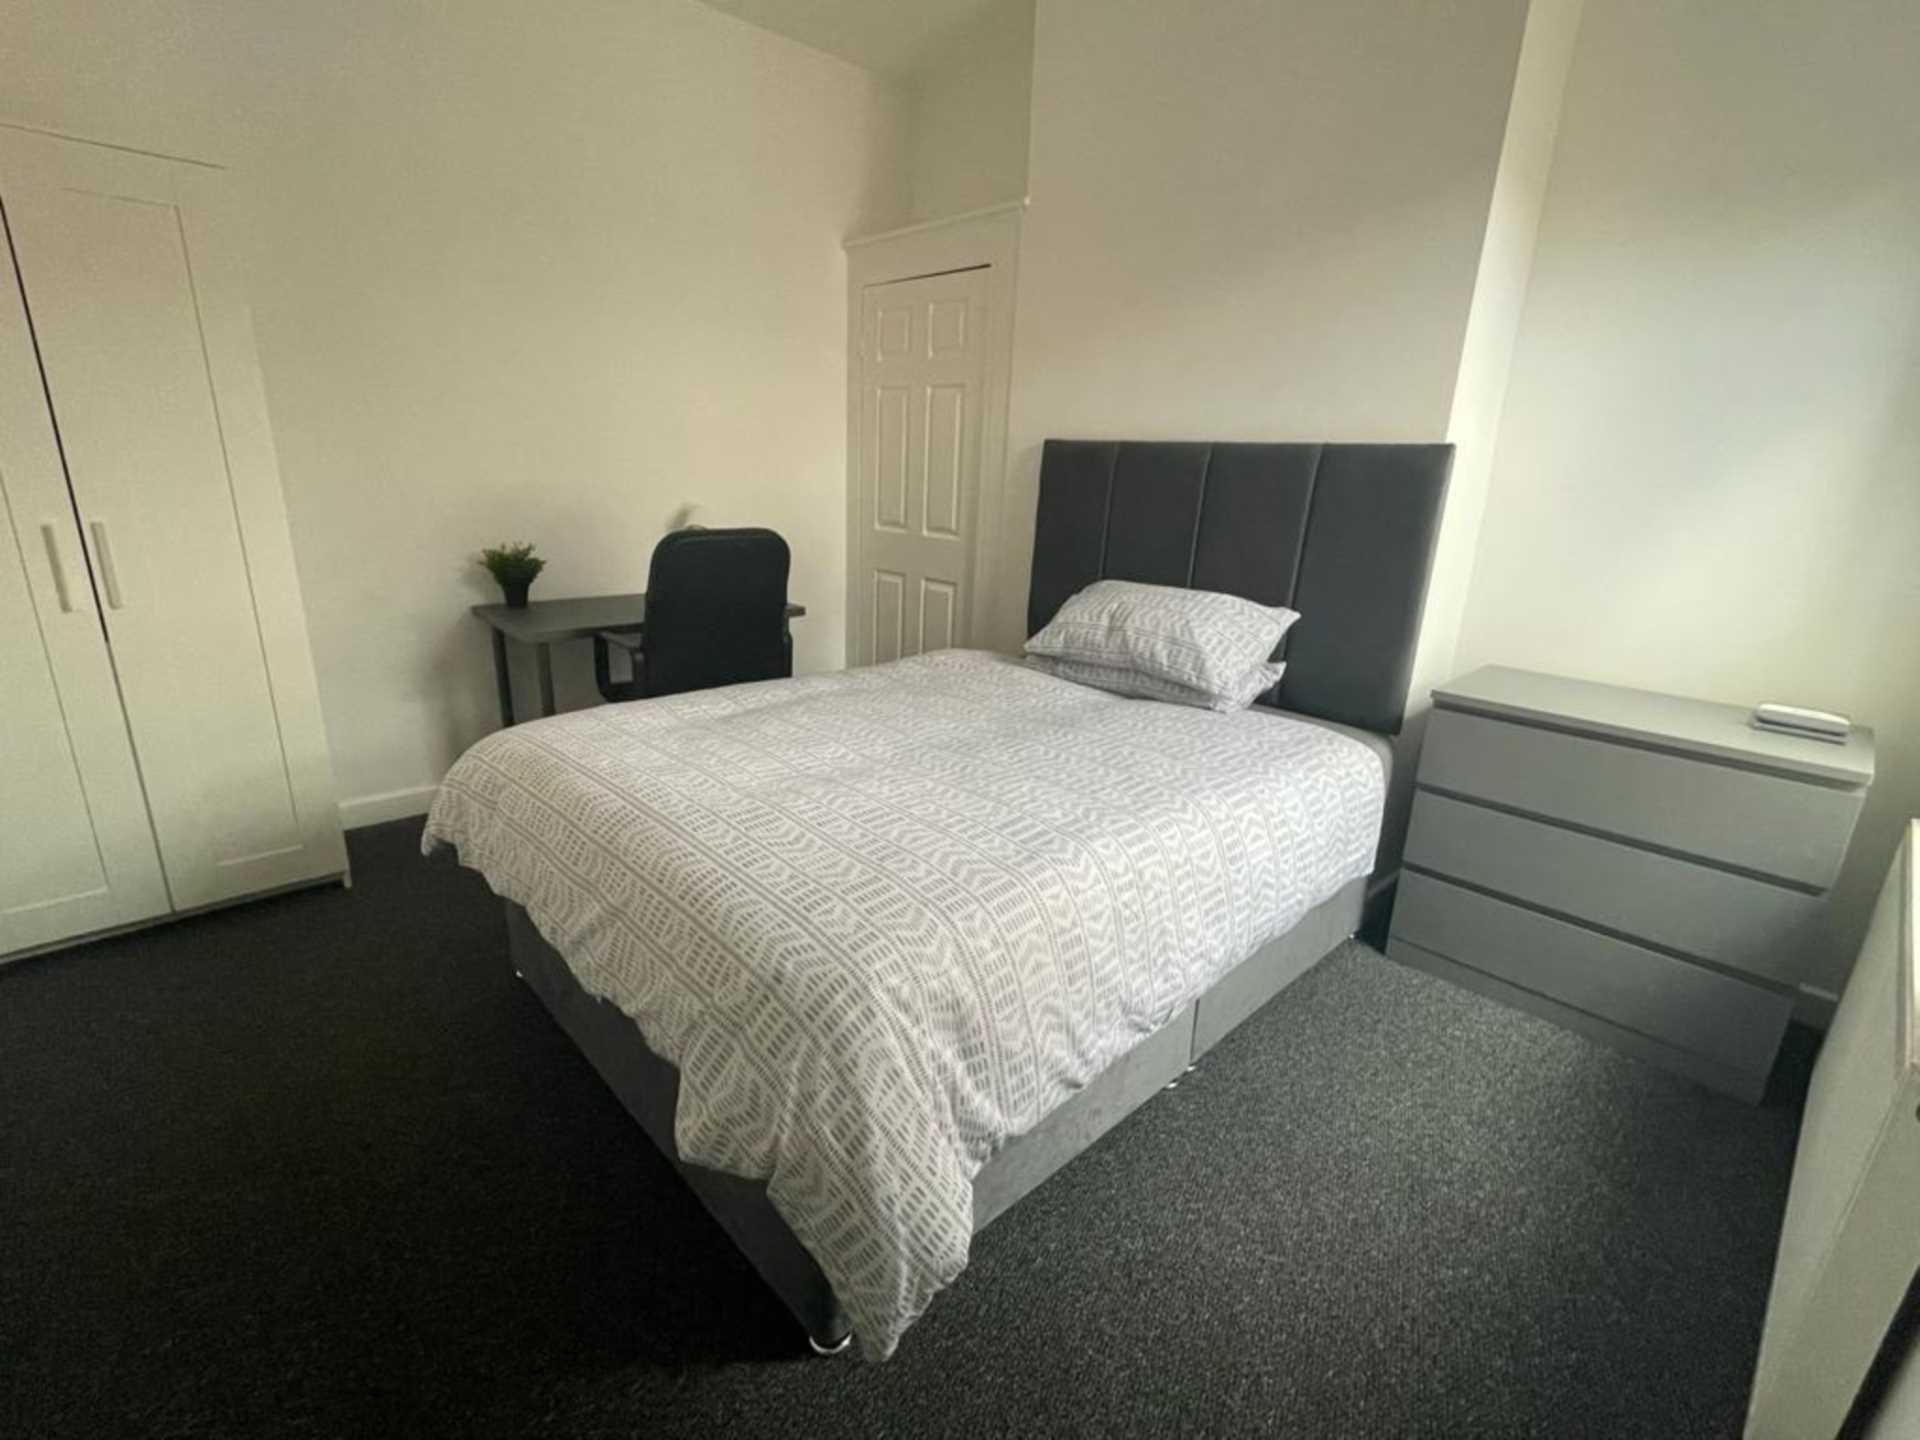 Thornycroft Road, Wavertree - 2 ROOMS AVAILABLE - STUDENTS/PROFESSIONALS, Image 3